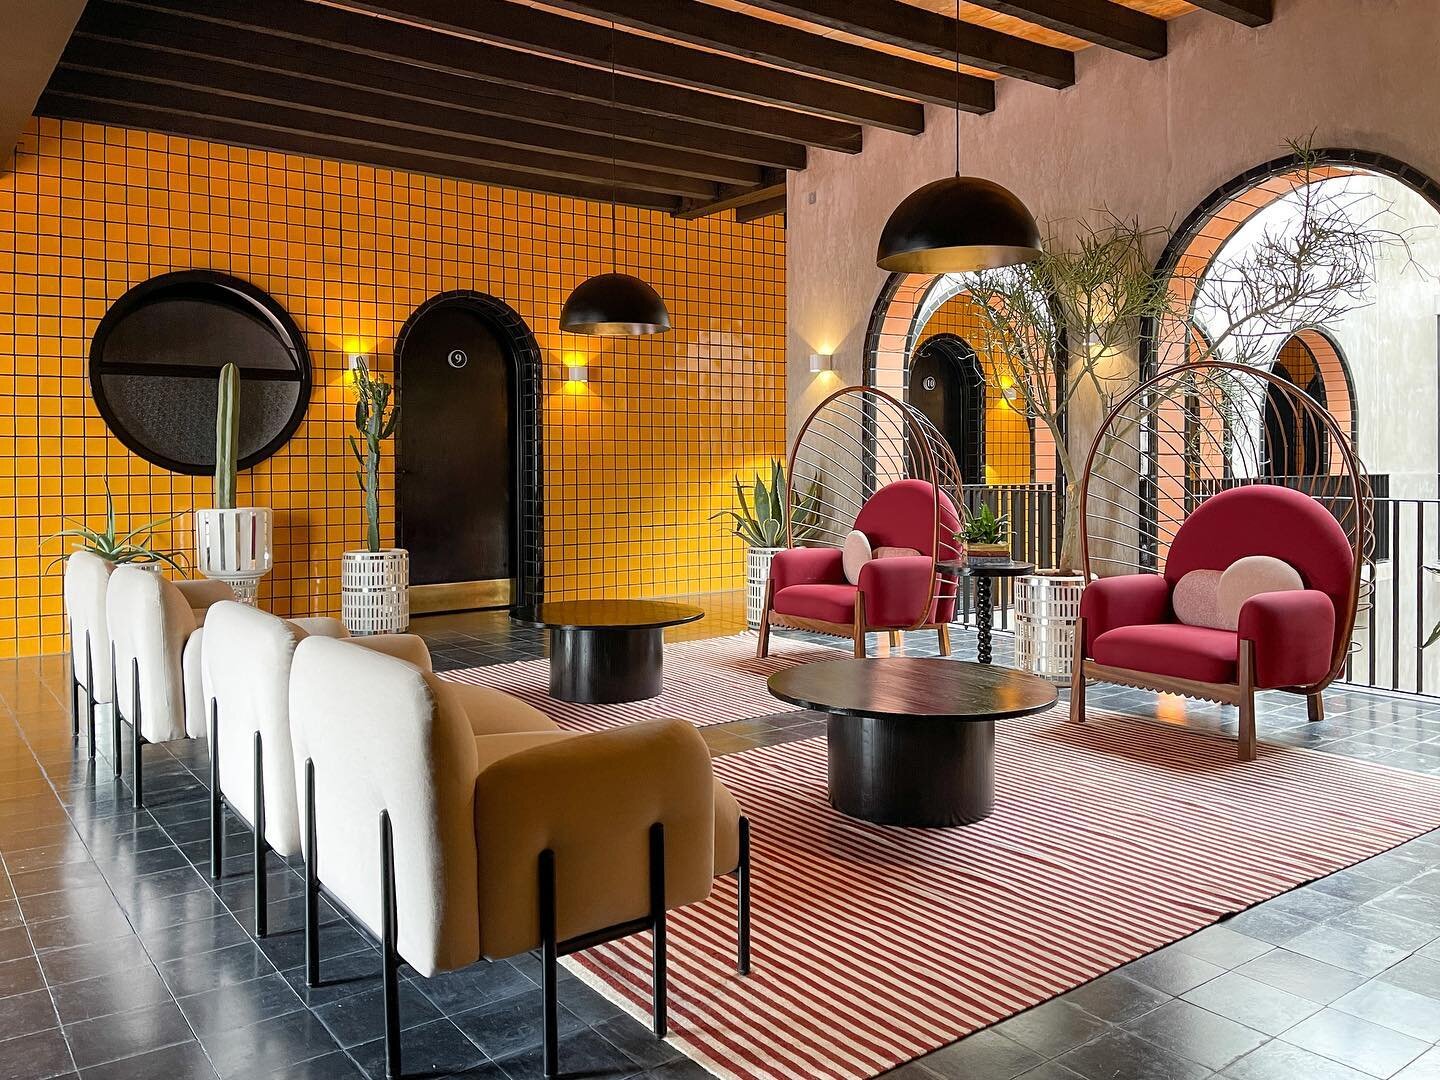 I&rsquo;ll admit it, I&rsquo;m a fan of @andresgandresg. When the time came for us to find the perfect place to stay in San Miguel de Allende, and I saw that @casahoyos was another one of his projects, the decision for me was easy.

The boutique hote